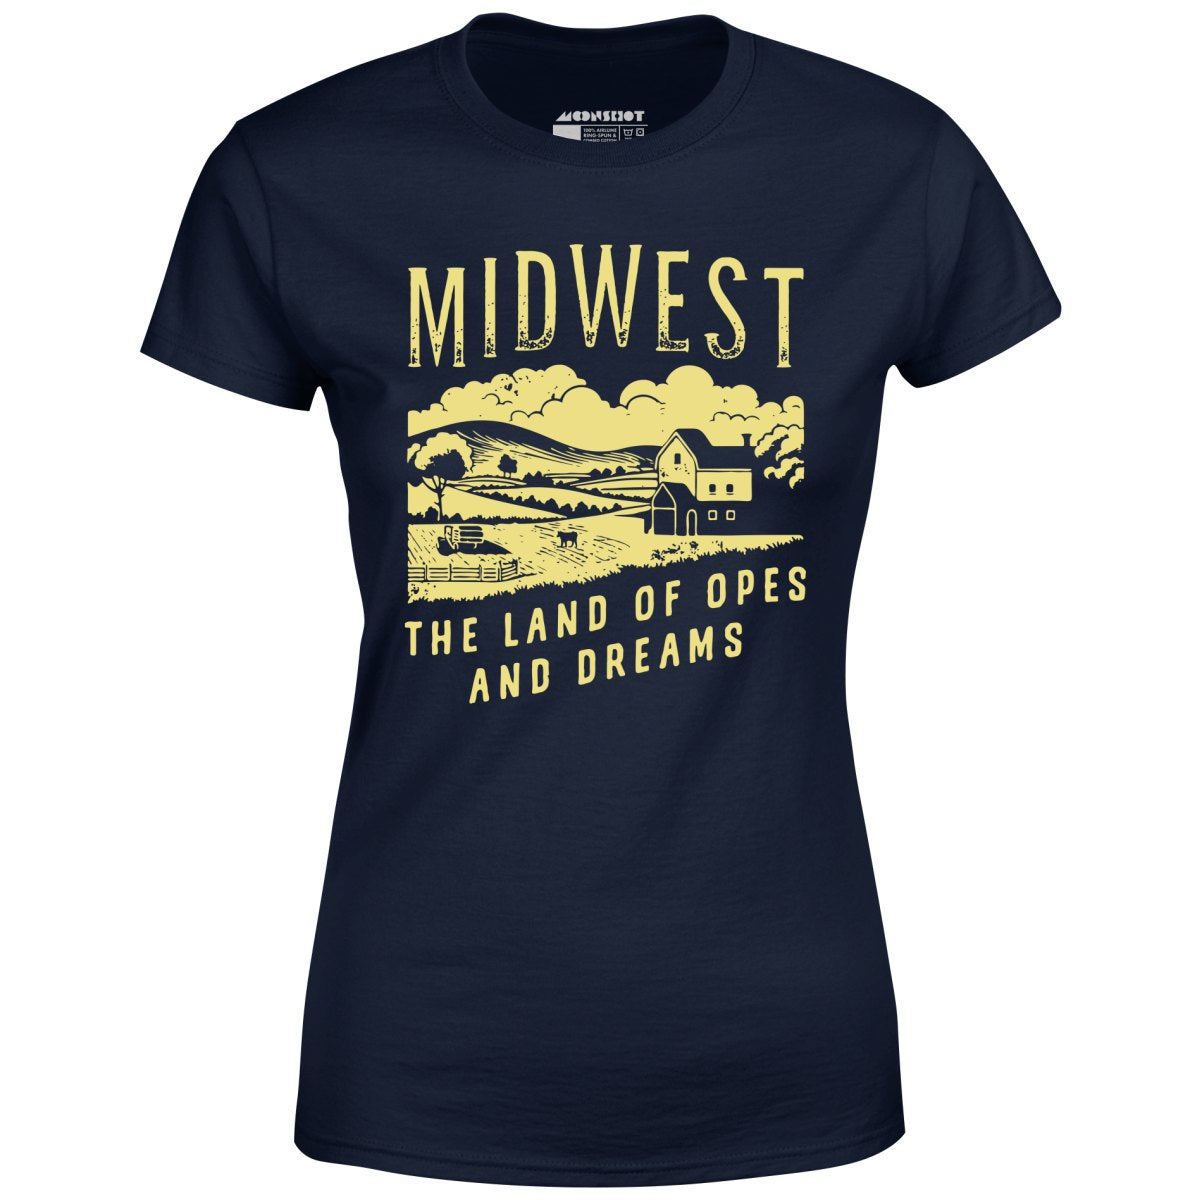 Midwest The Land of Opes and Dreams - Women's T-Shirt